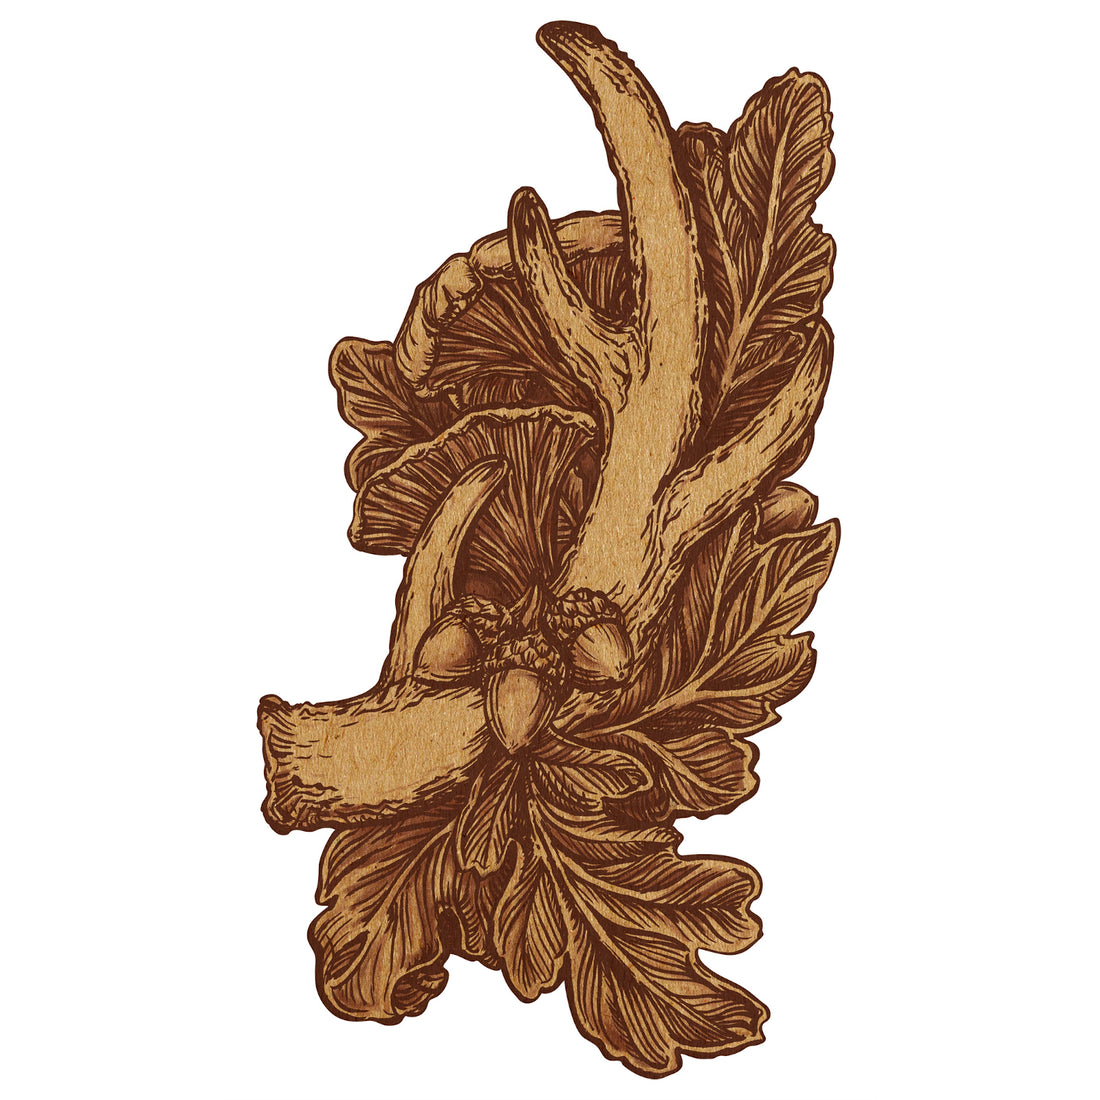 A die-cut kraft paper illustration in rich brown on tan, depicting an antler surrounded by oak leaves, acorns and mushrooms; a perfect accent to any rustic tablescape.